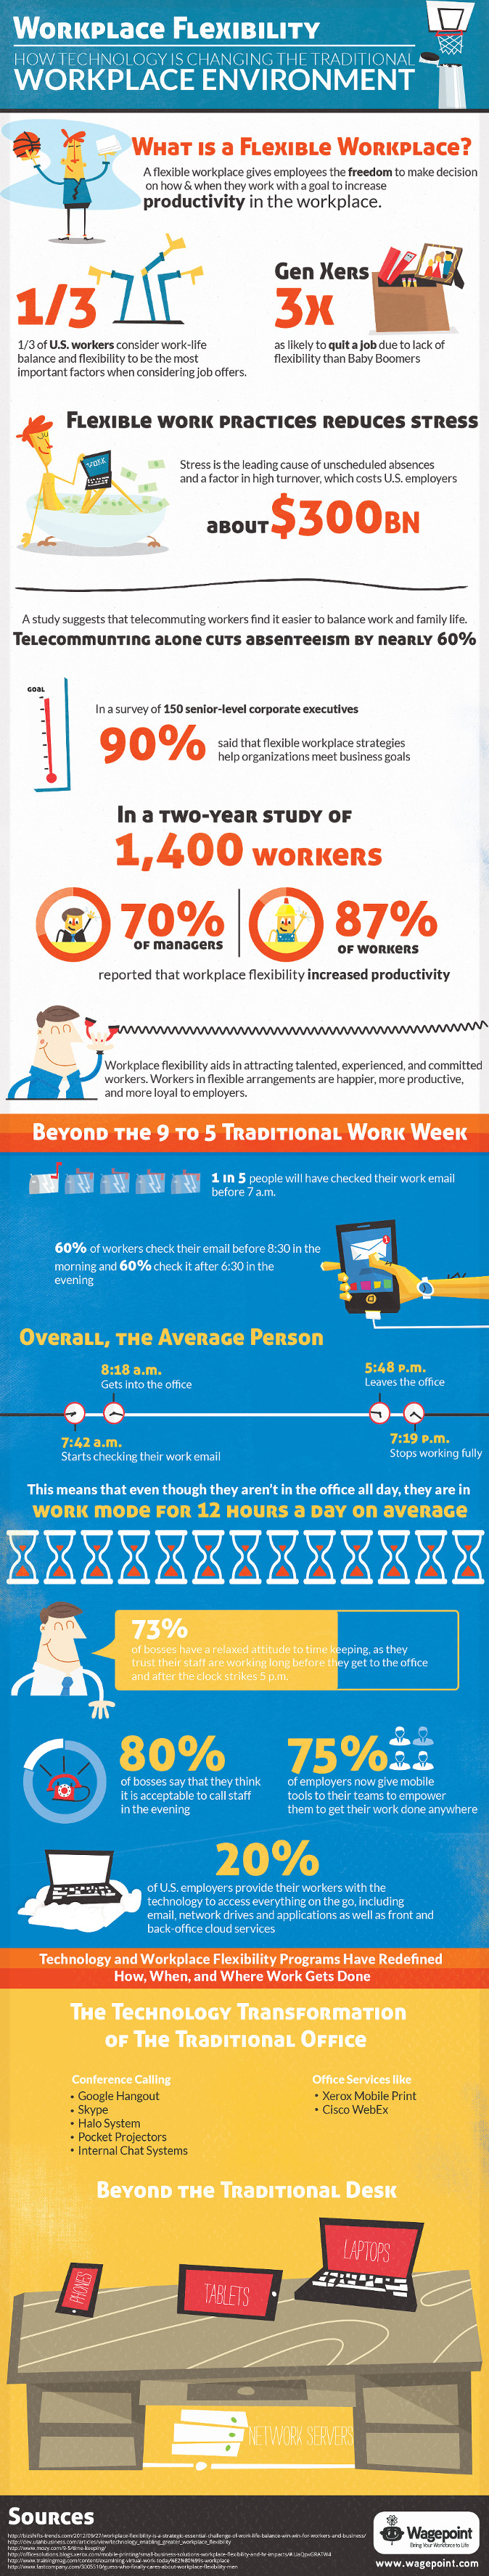 workplace flexibility infographic